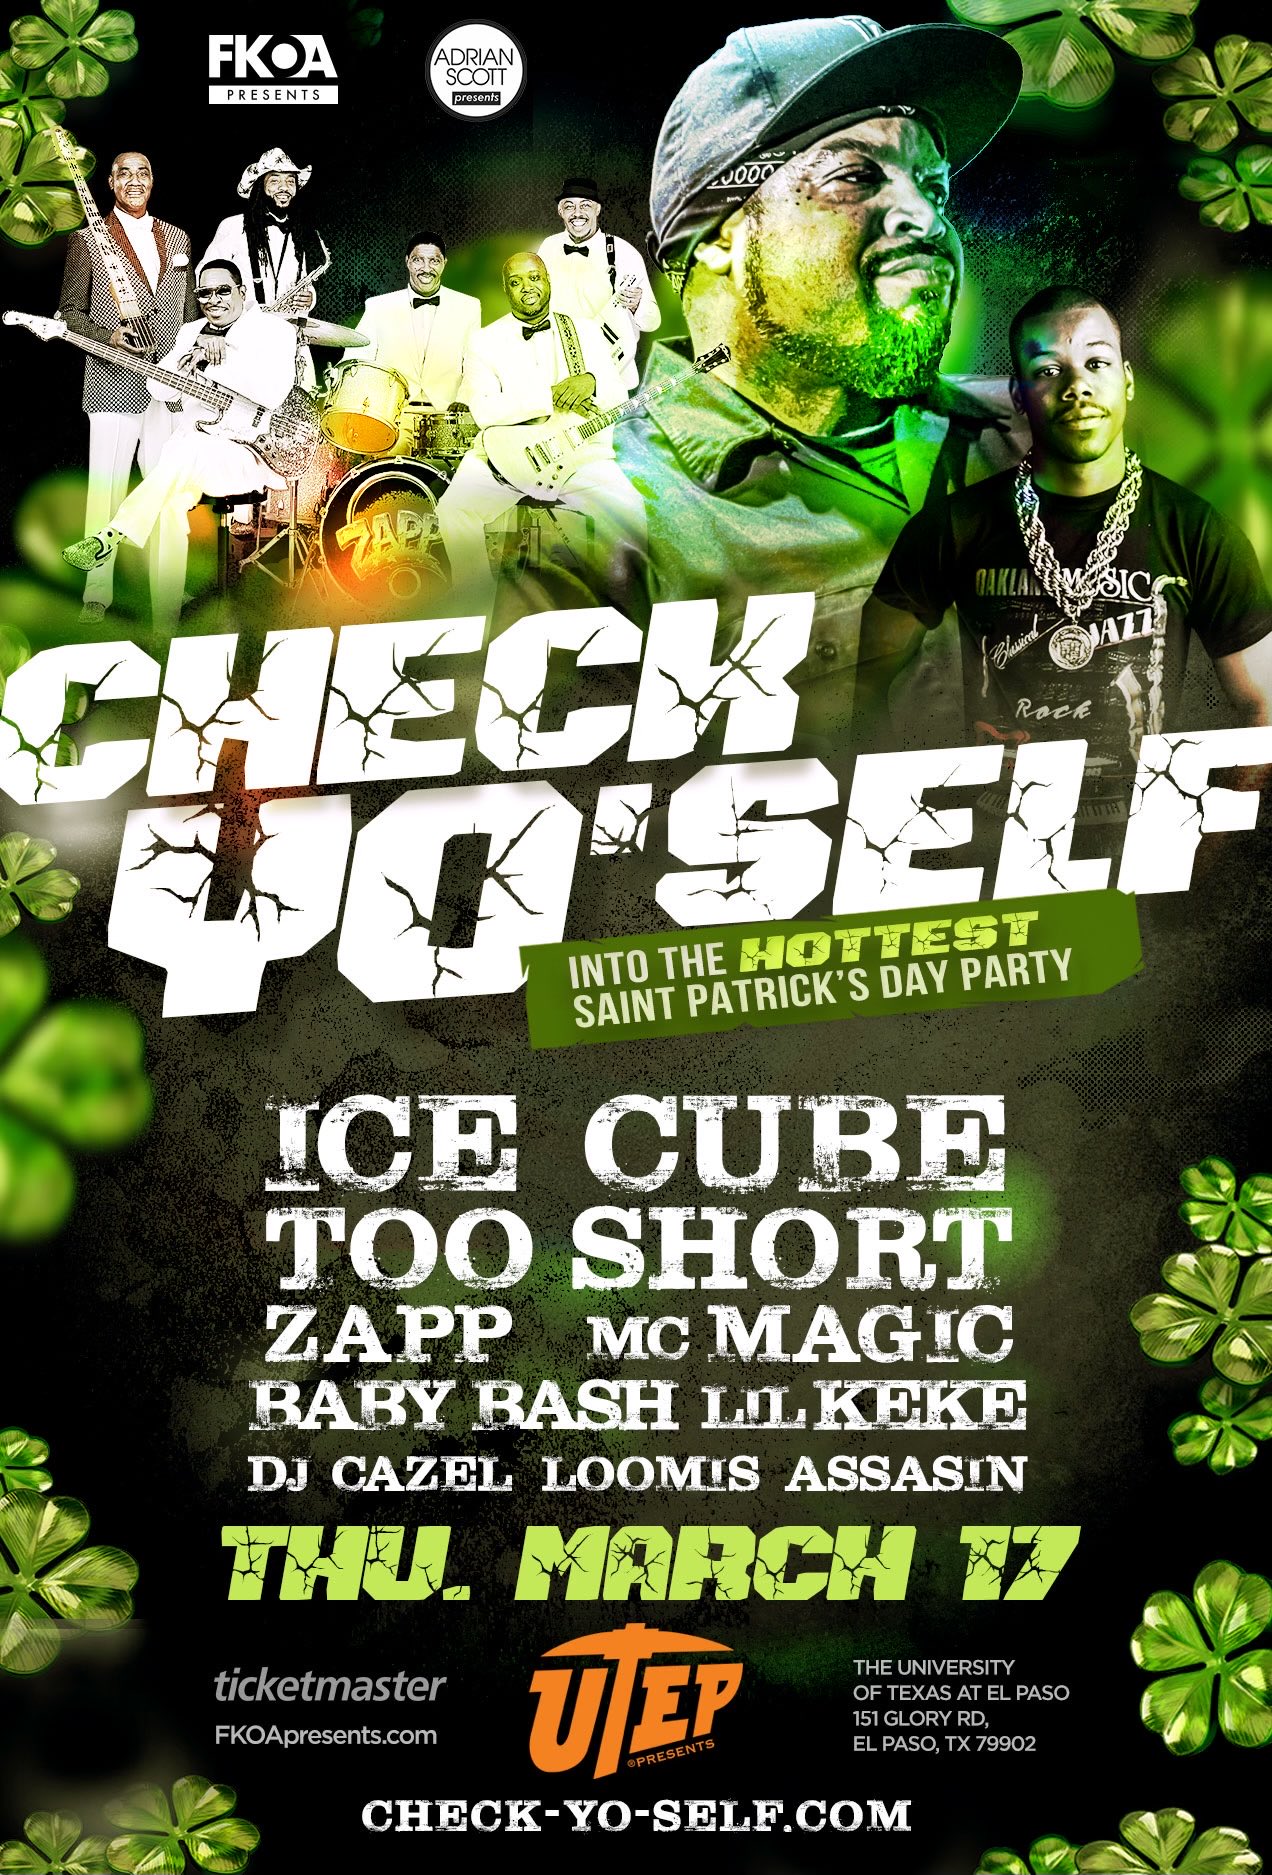 Ice Cube on Twitter: "Celebrate St. Cube's Day in El Paso, TX tomorrow.  Treat yourself don't cheat yourself! https://t.co/37nCE4fw6O" / Twitter